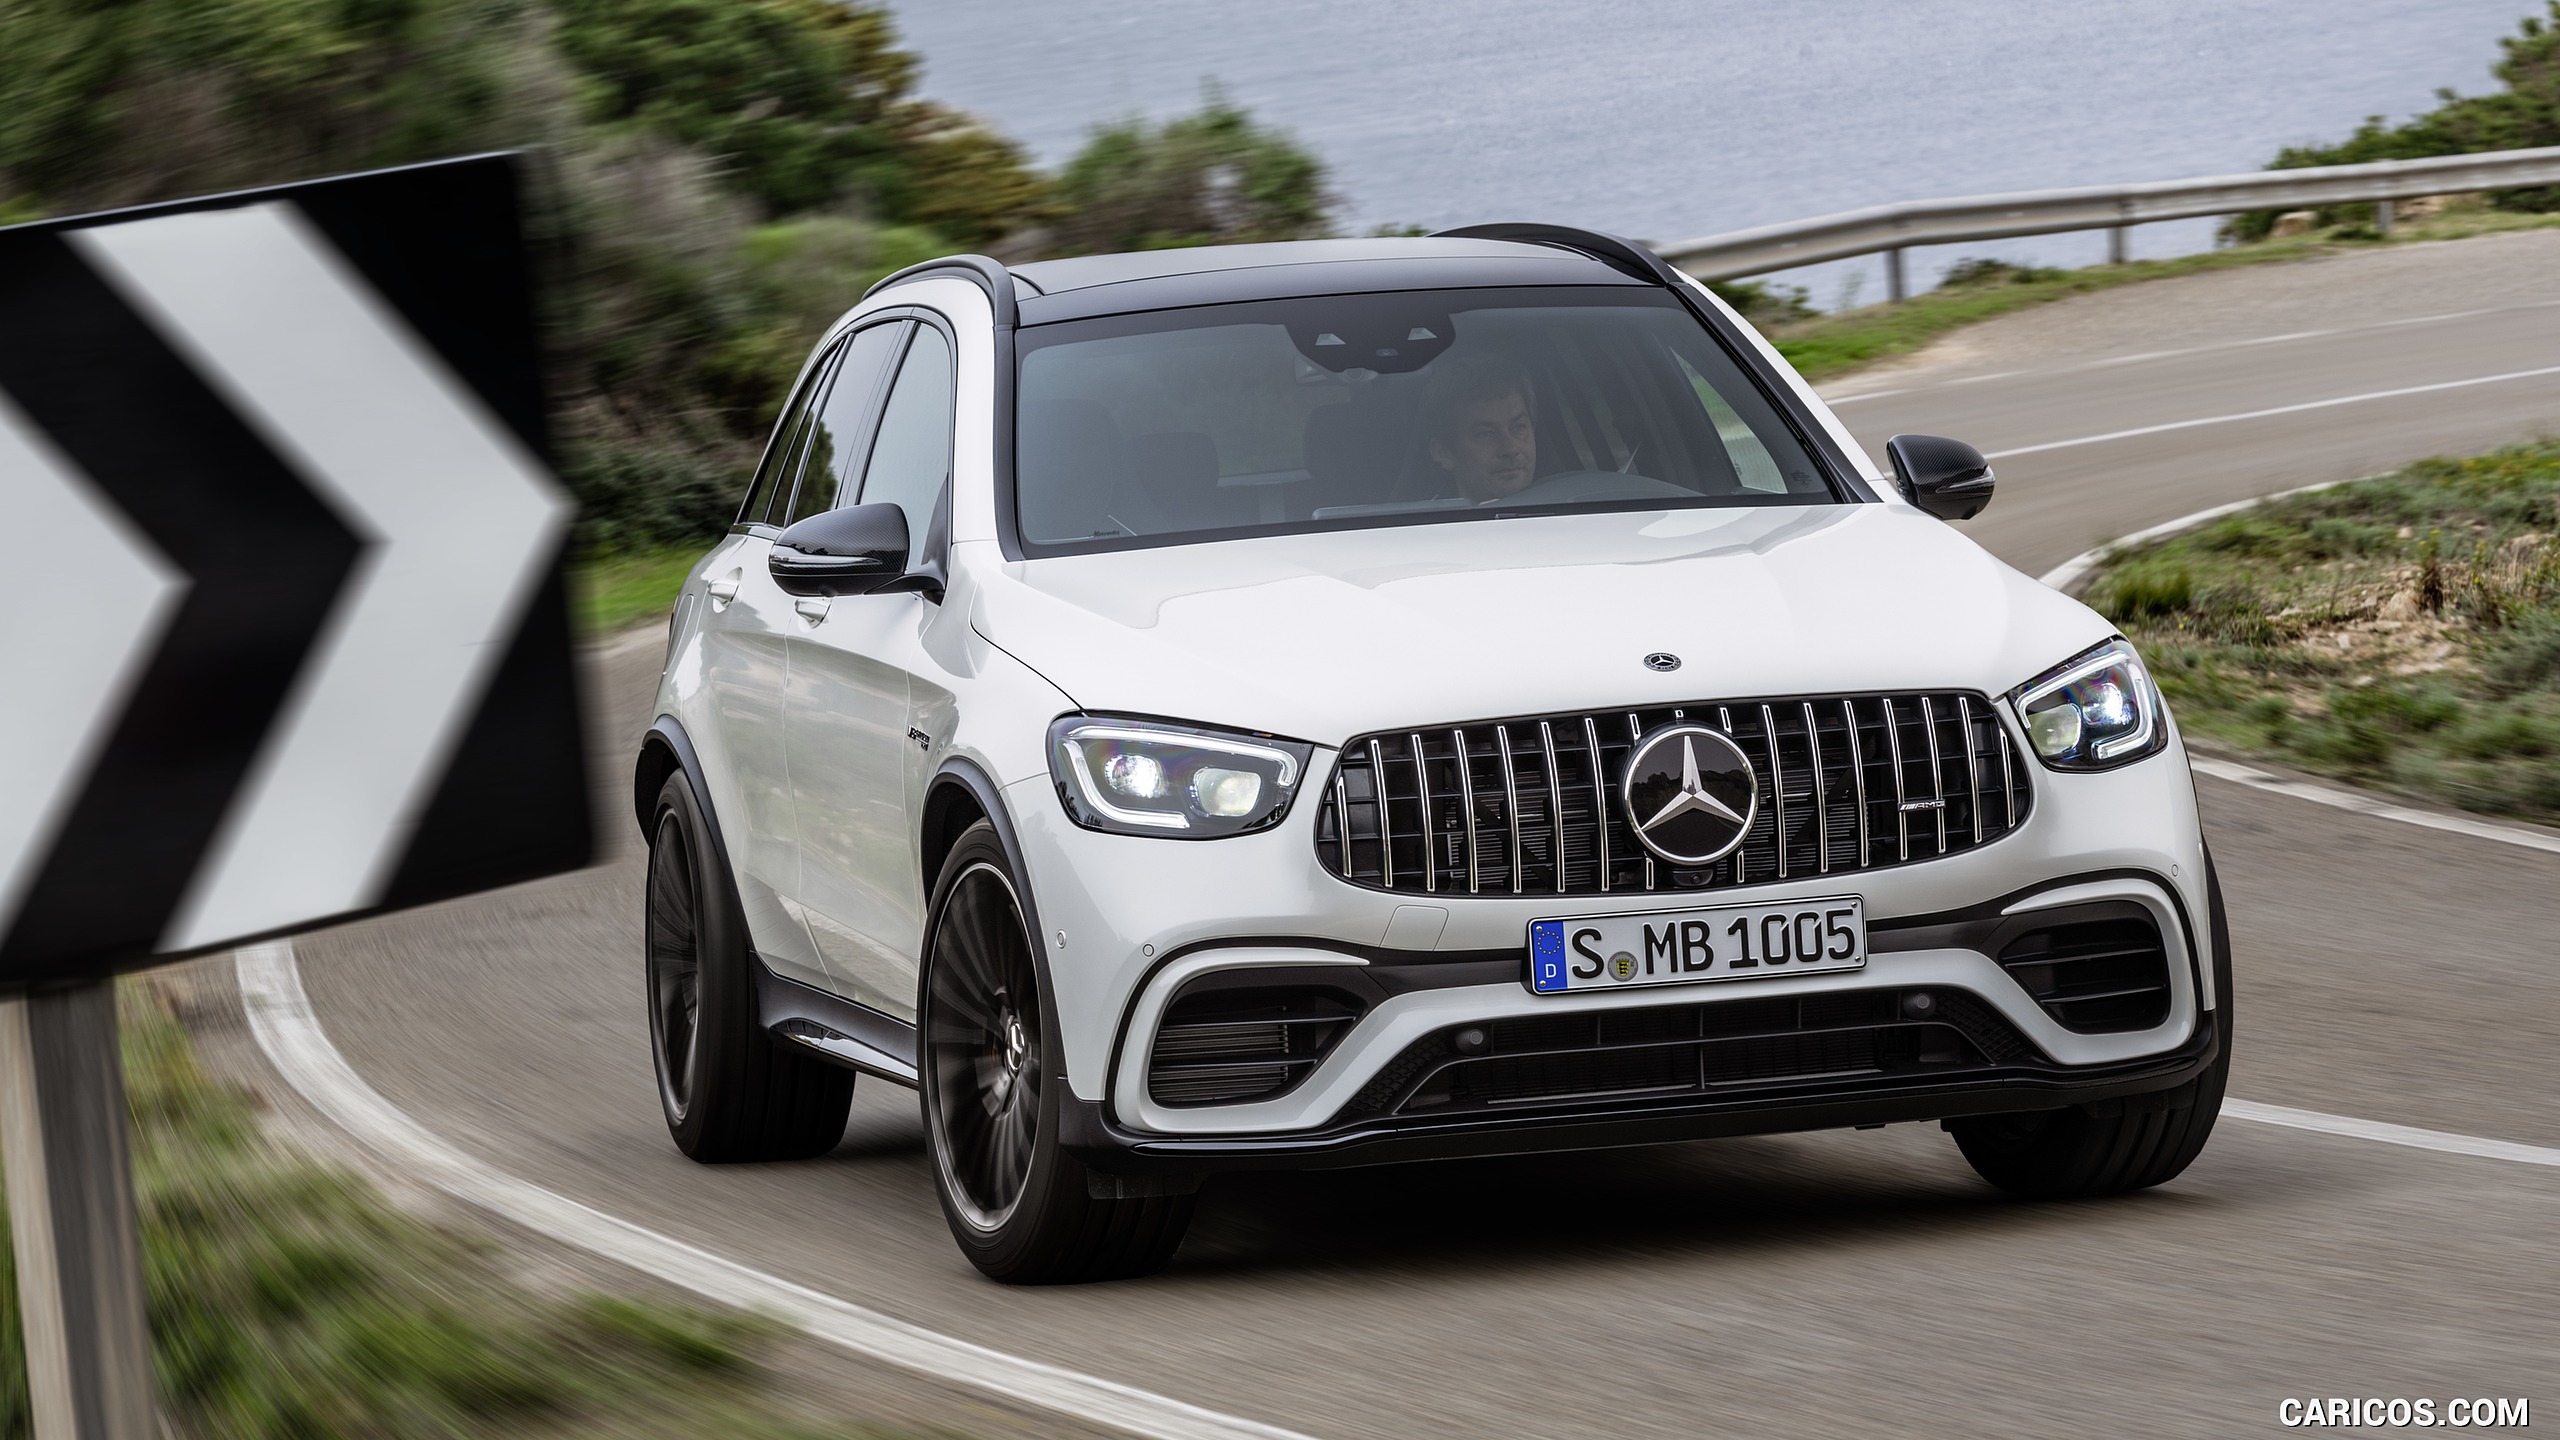 2020 Mercedes-AMG GLC 63 S 4MATIC+ - Front, #14 of 118